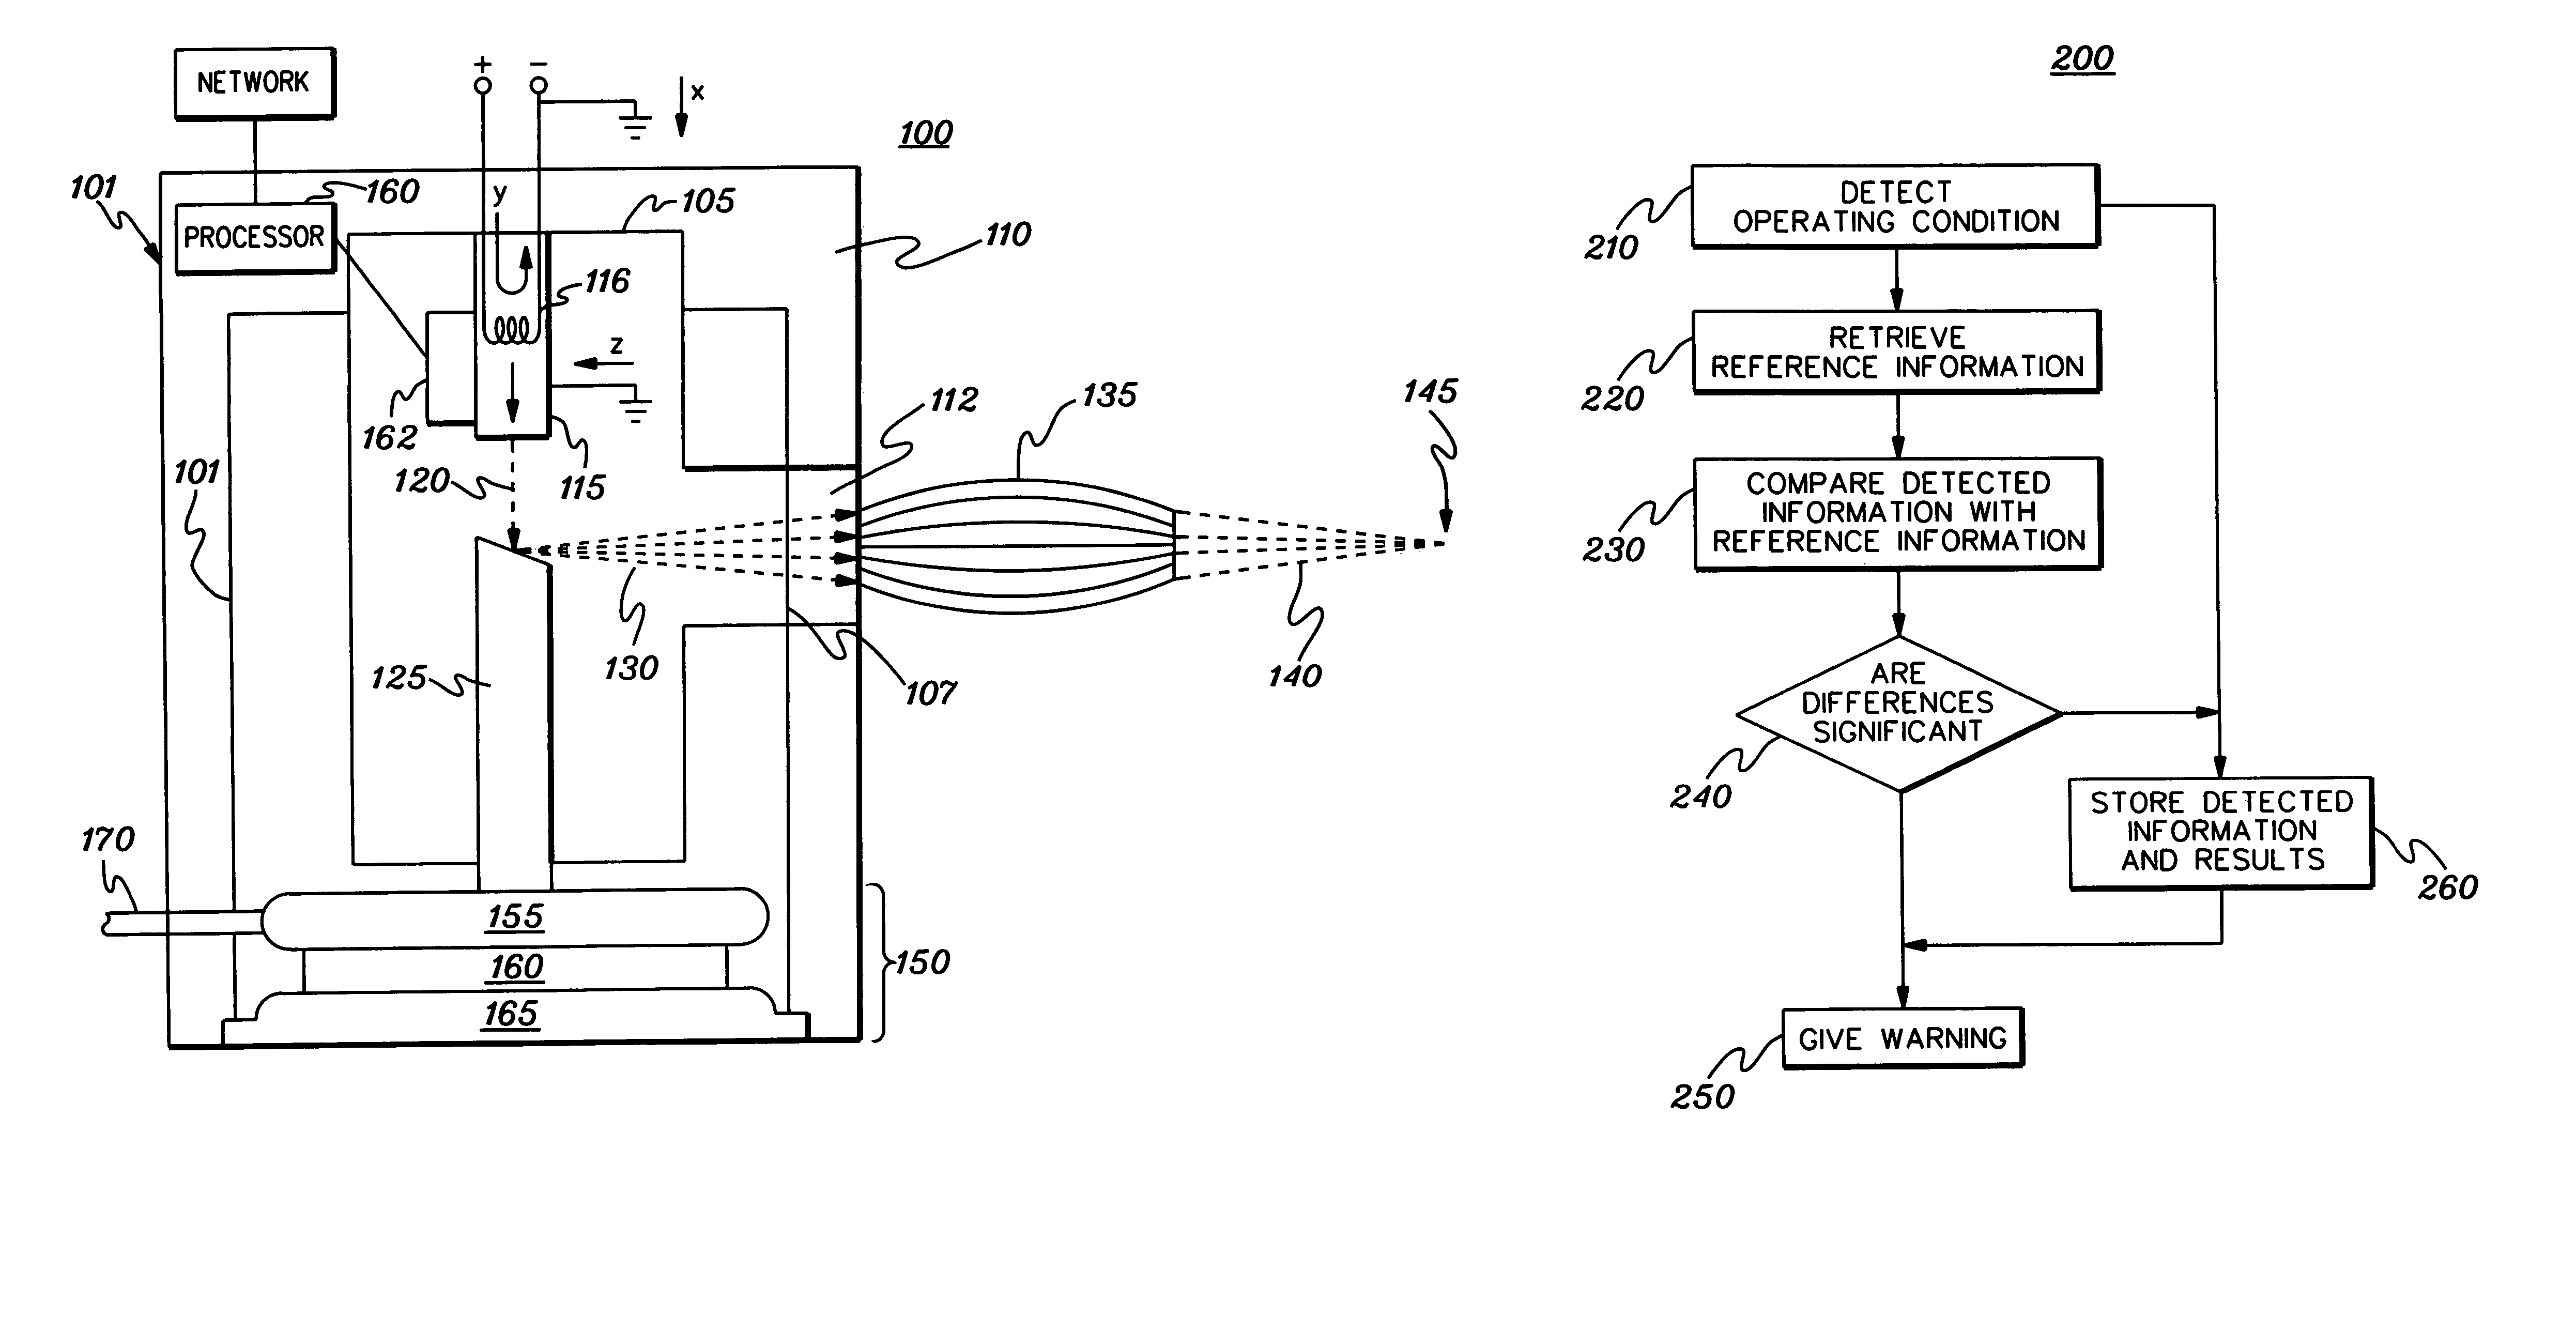 Diagnosing system for an x-ray source assembly